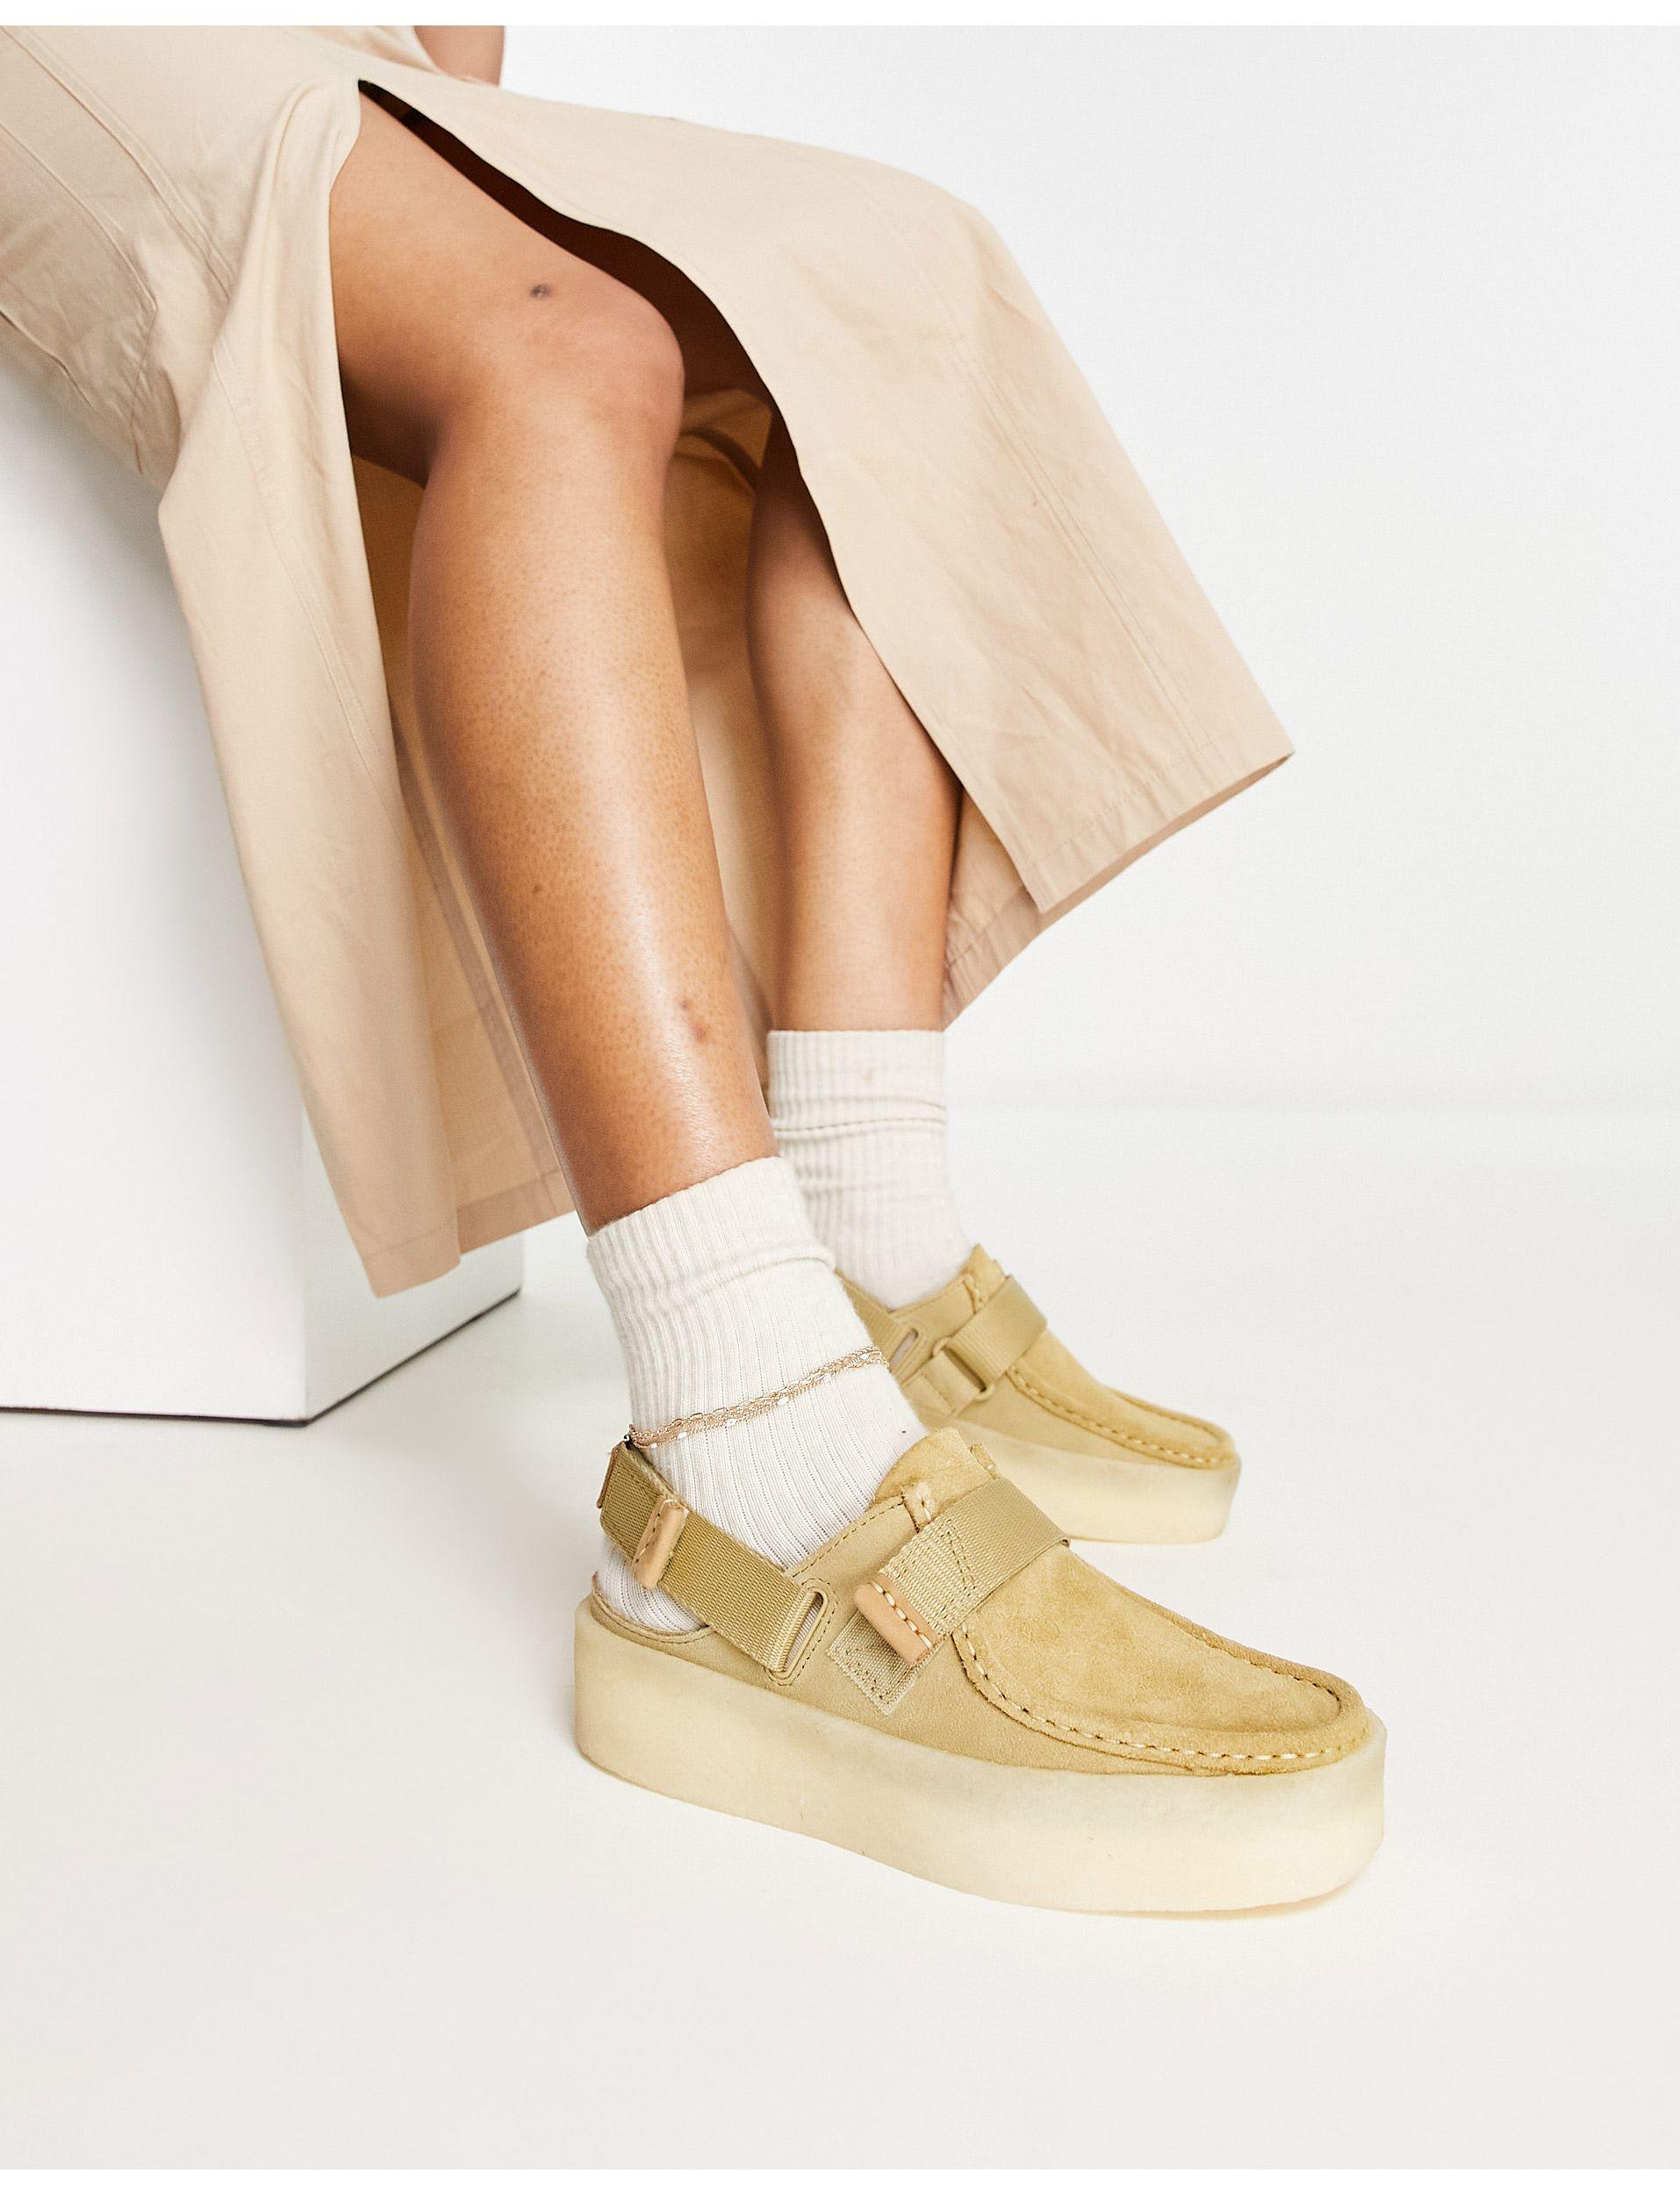 Clarks Wallabee Cupsole Slingback Sandals in White | Lyst UK